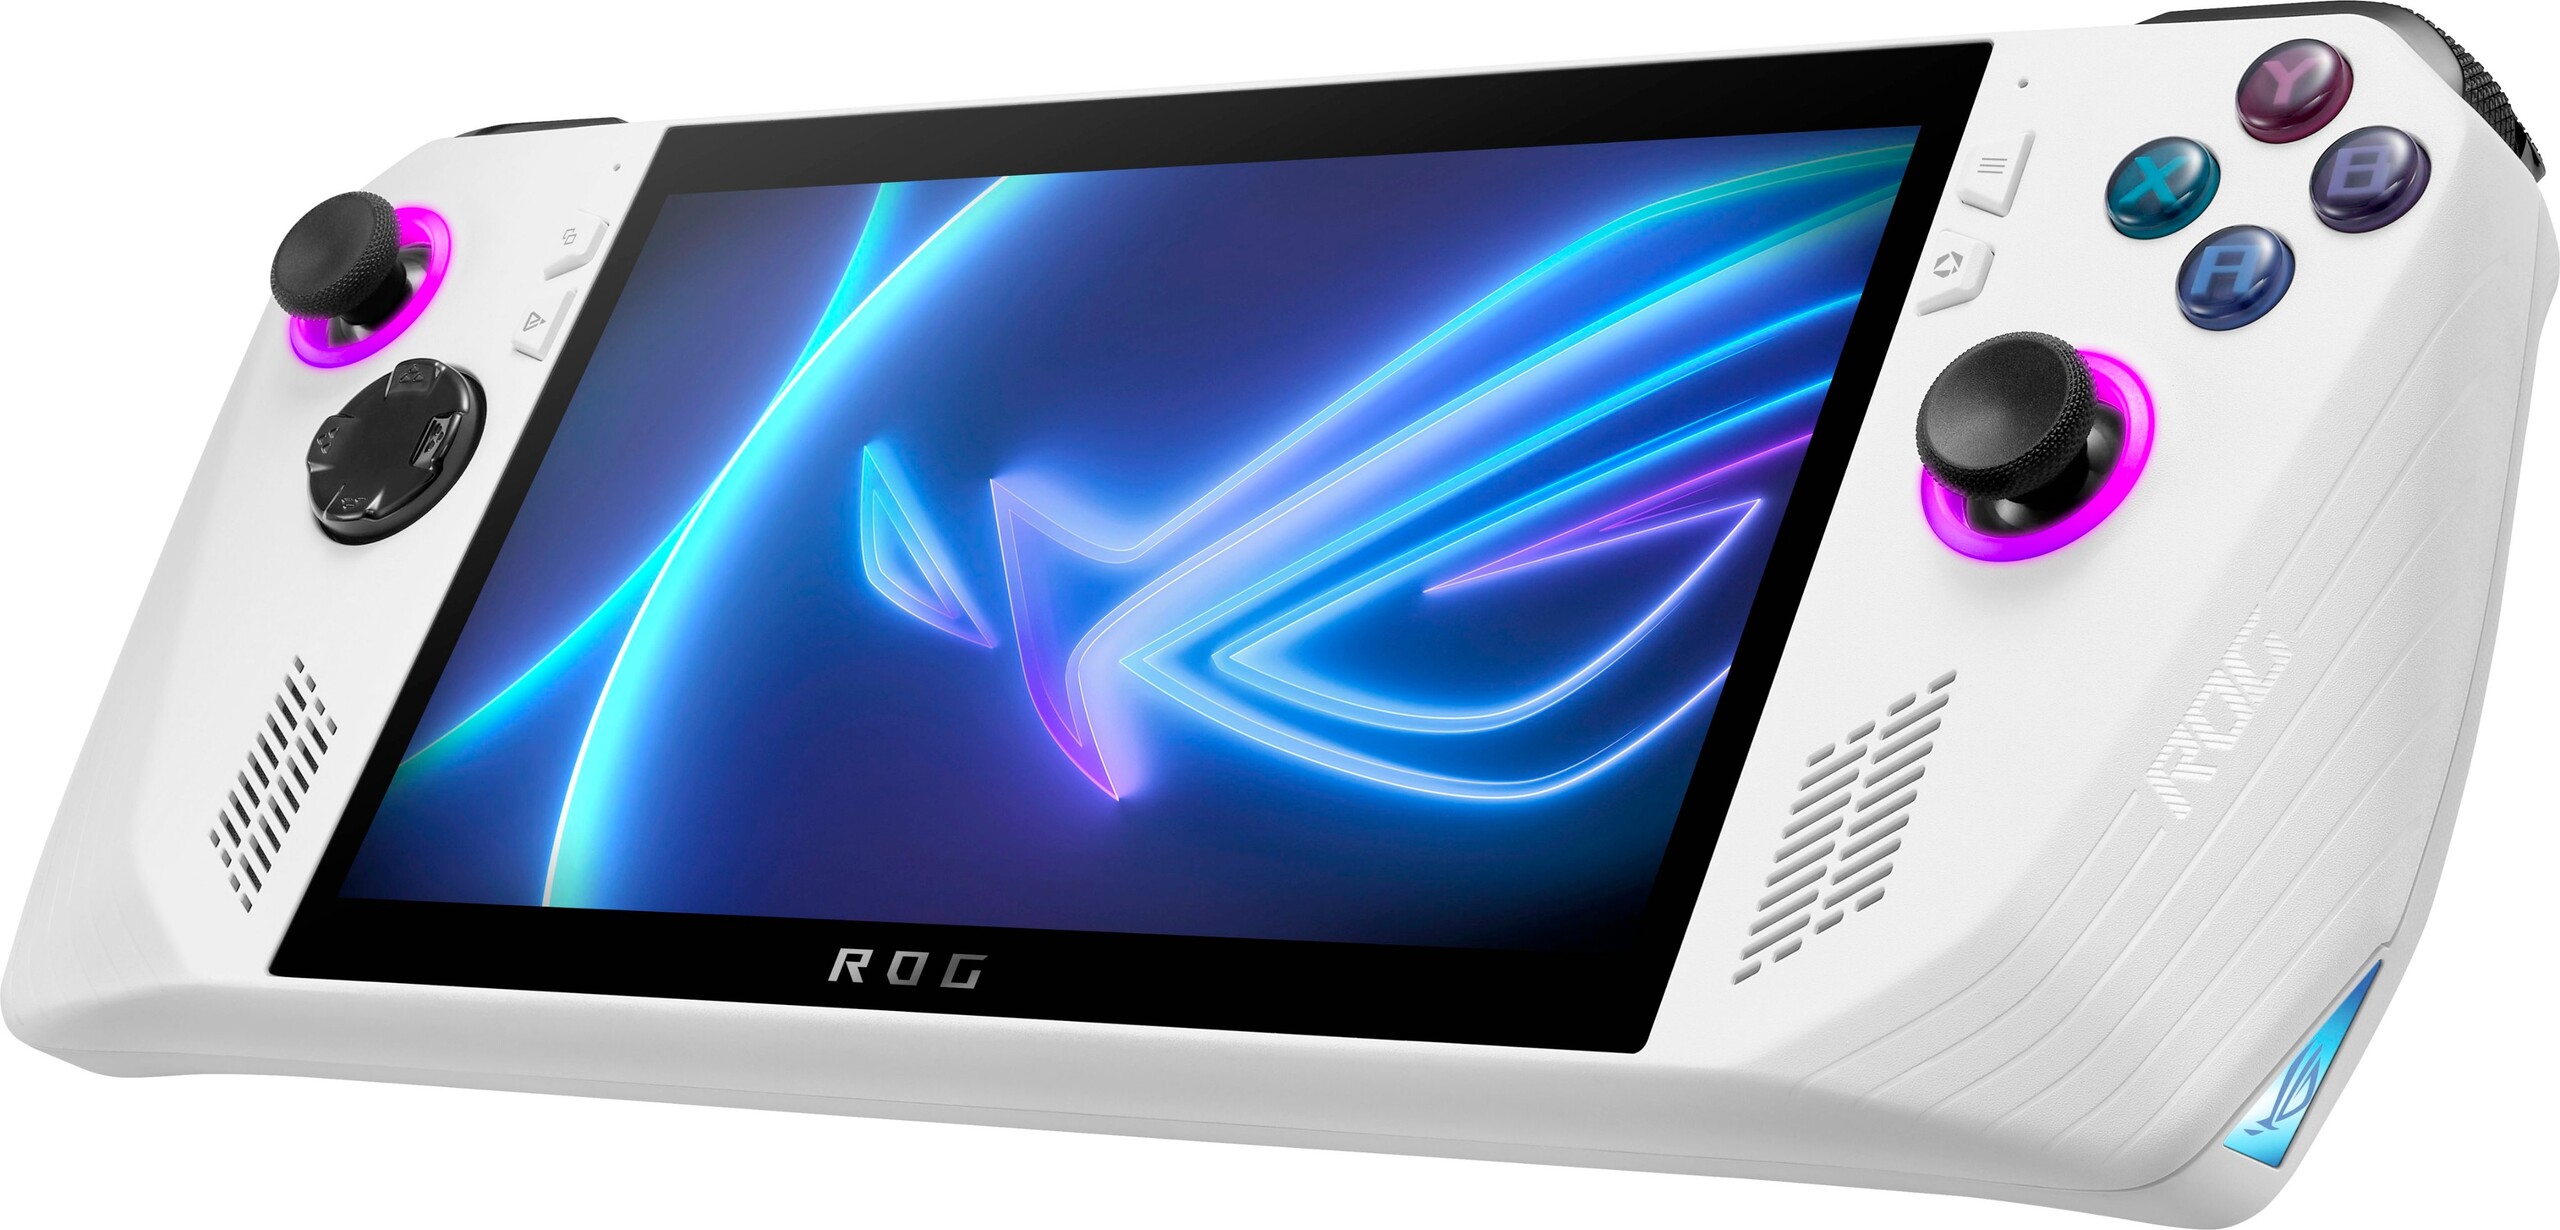 Leaked Asus ROG Ally pricing could be trouble for Steam Deck